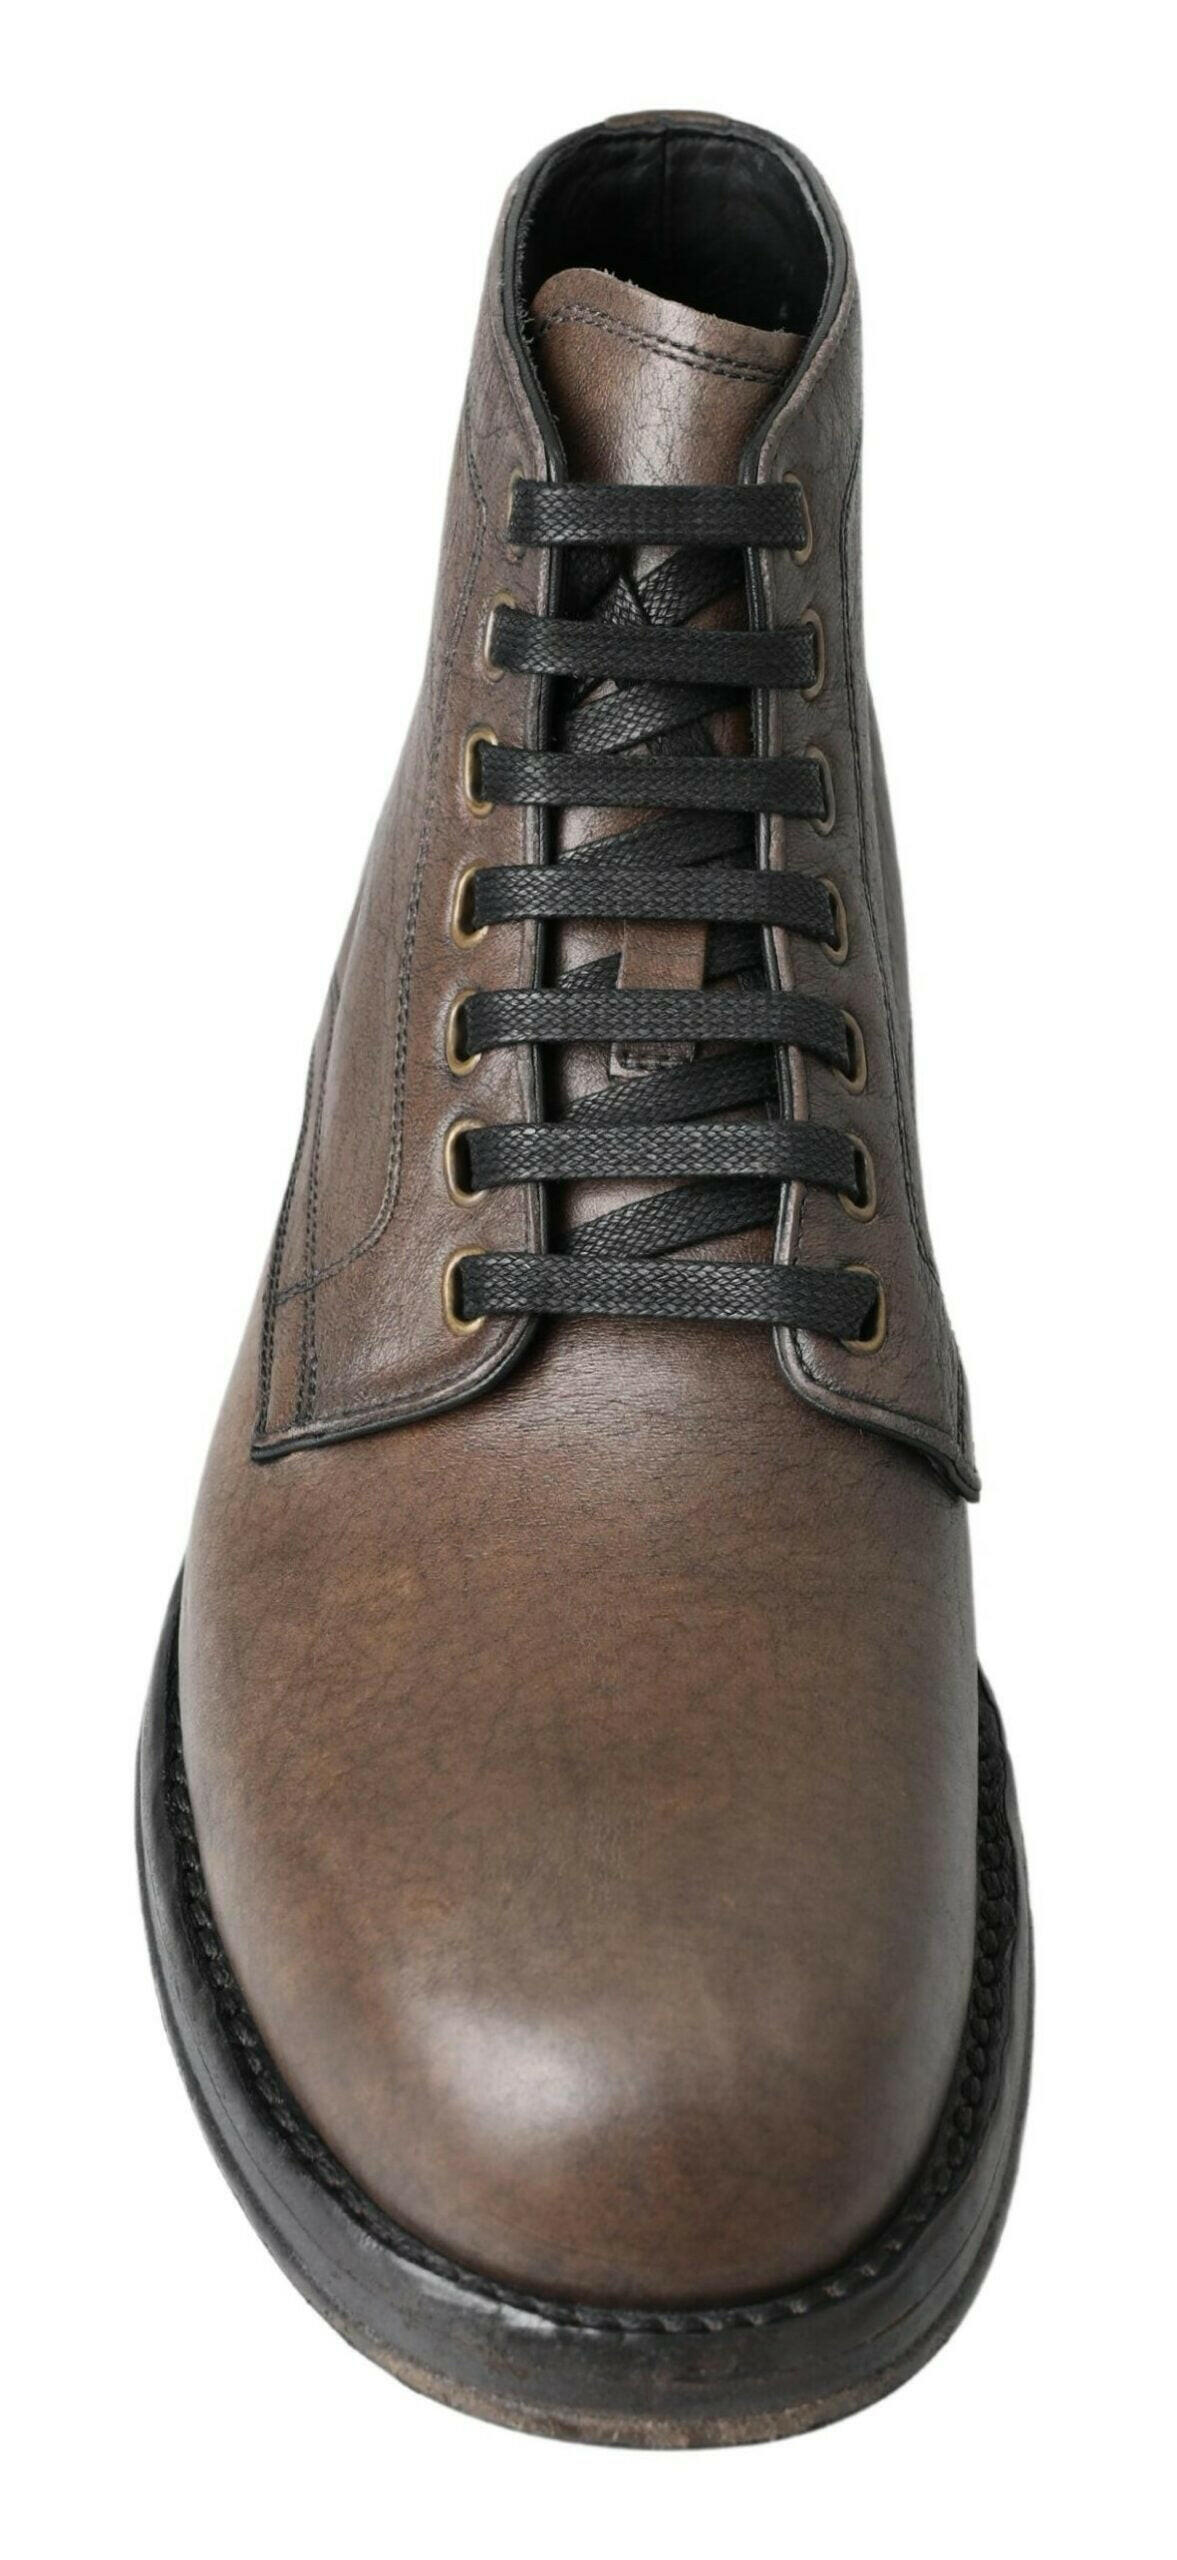 Dolce & Gabbana Brown Horse Leather Perugino Shoes - GENUINE AUTHENTIC BRAND LLC  